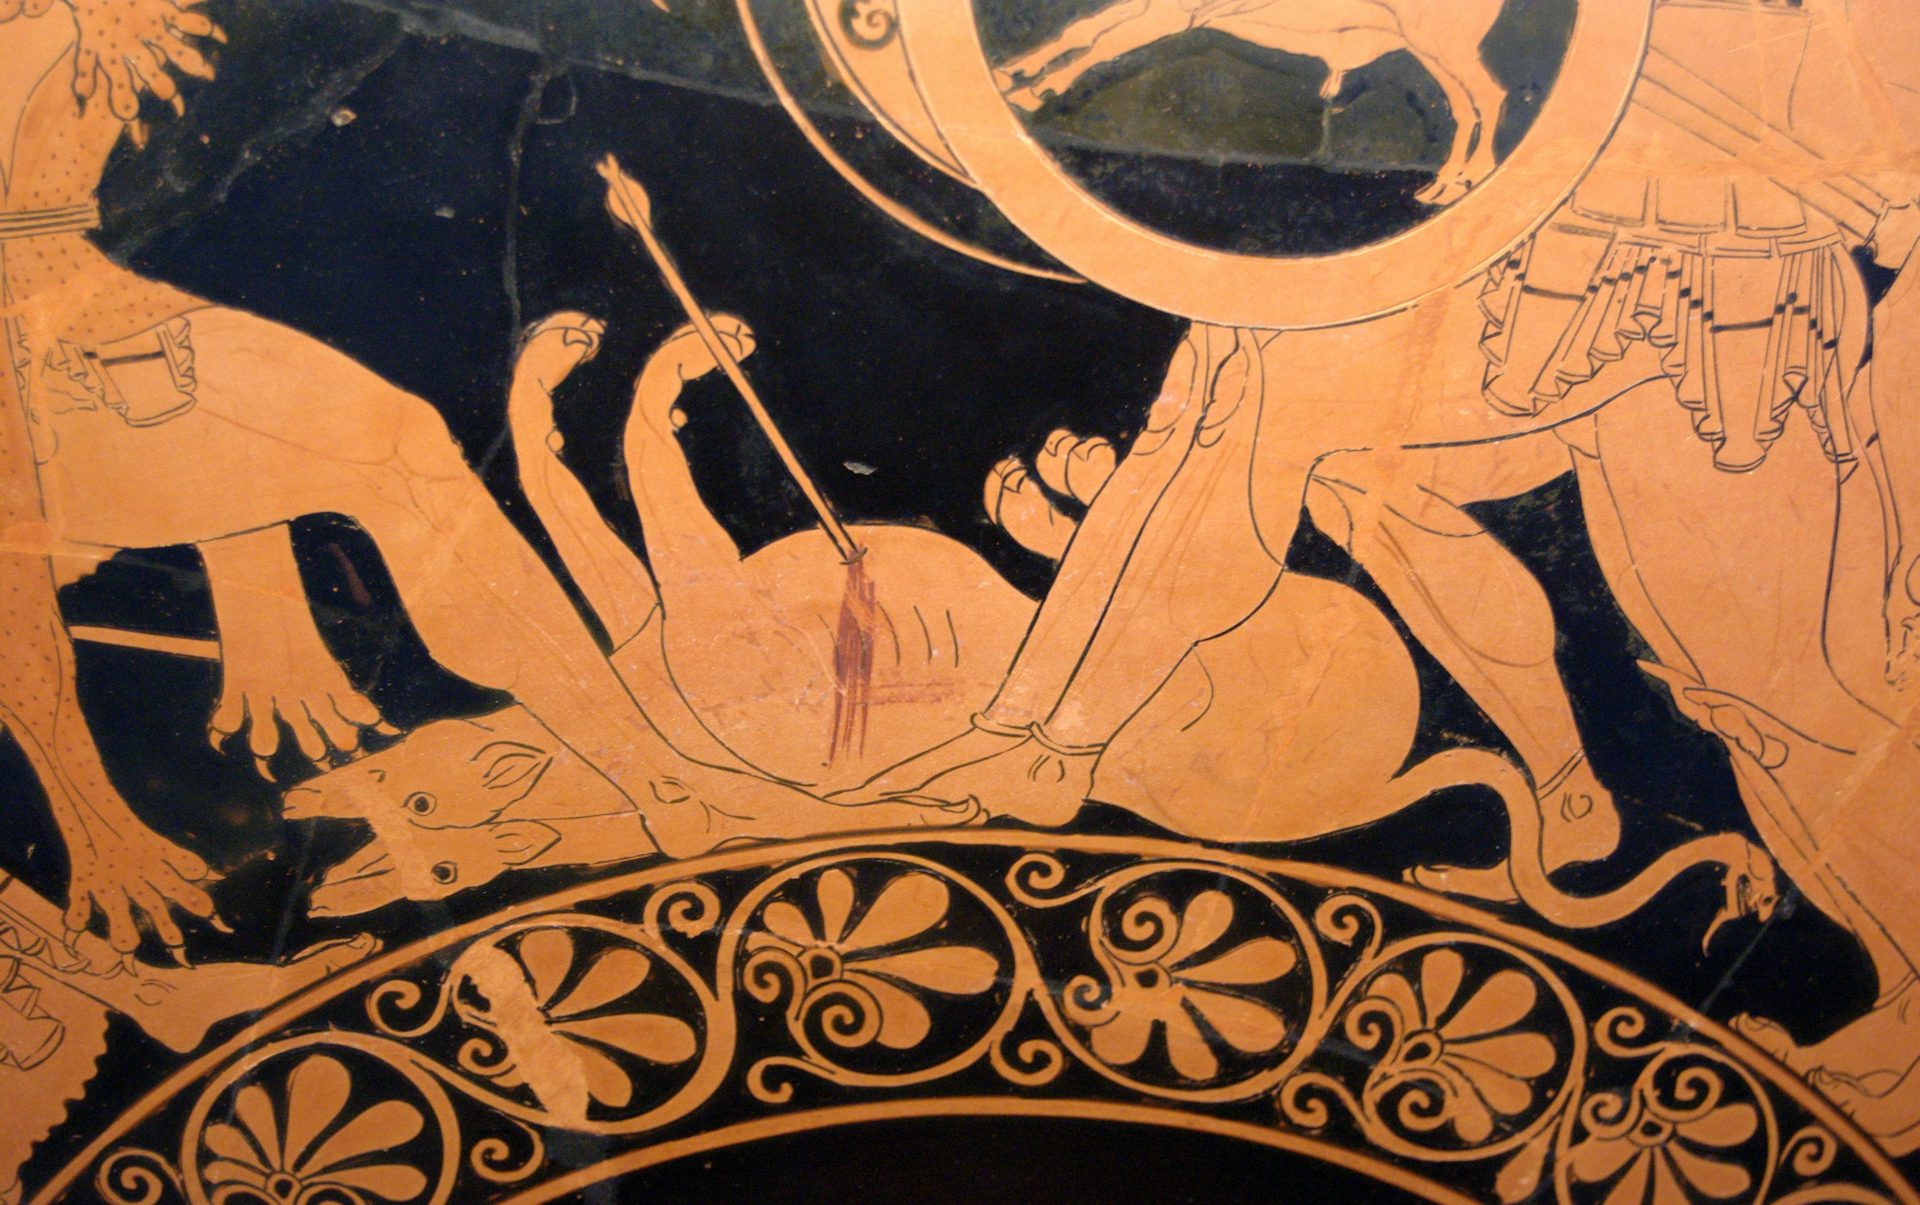 Orthus attic red-figure kylix signed by Kachrylion and Euphronios circa 510-500 BCE